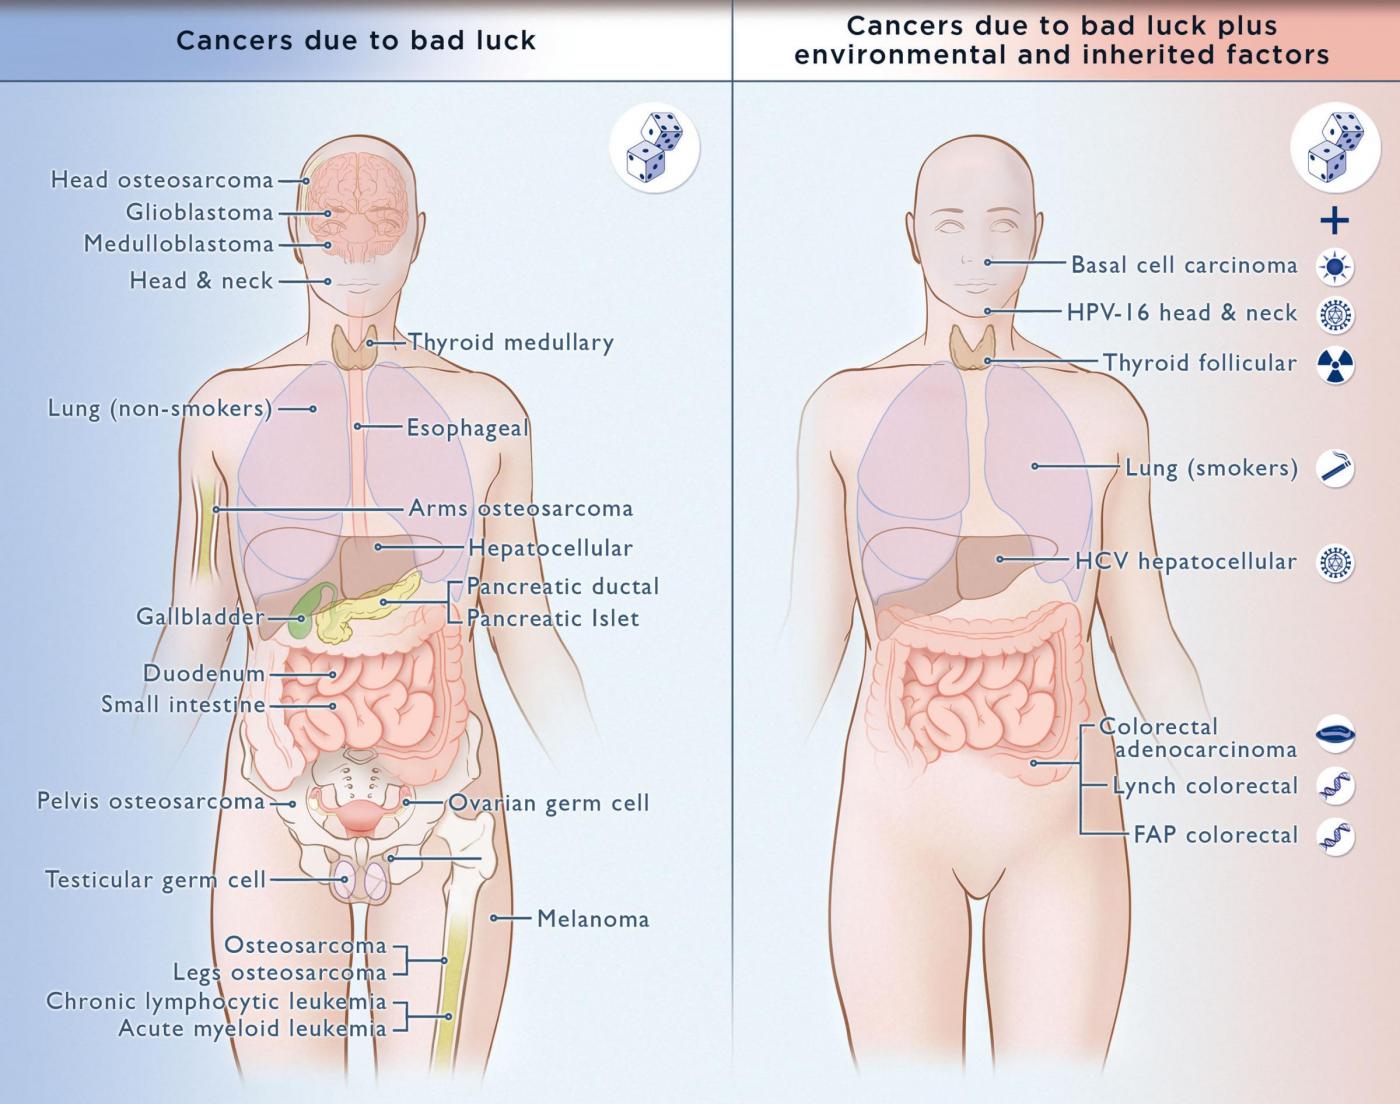 Most cancer cases due to bad luck